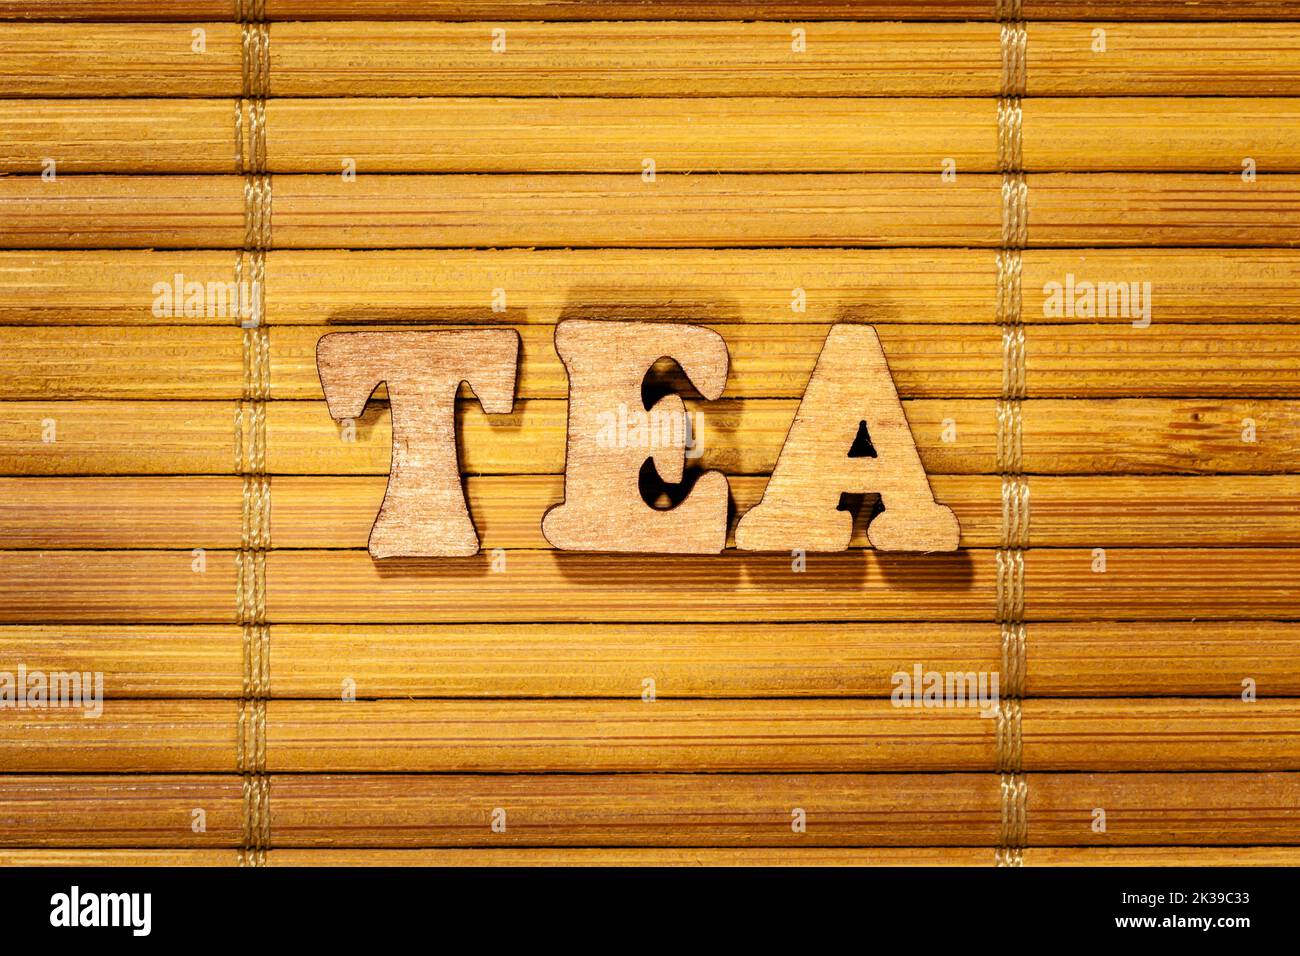 Tea word - Inscription by wooden letters on bamboo mat Stock Photo